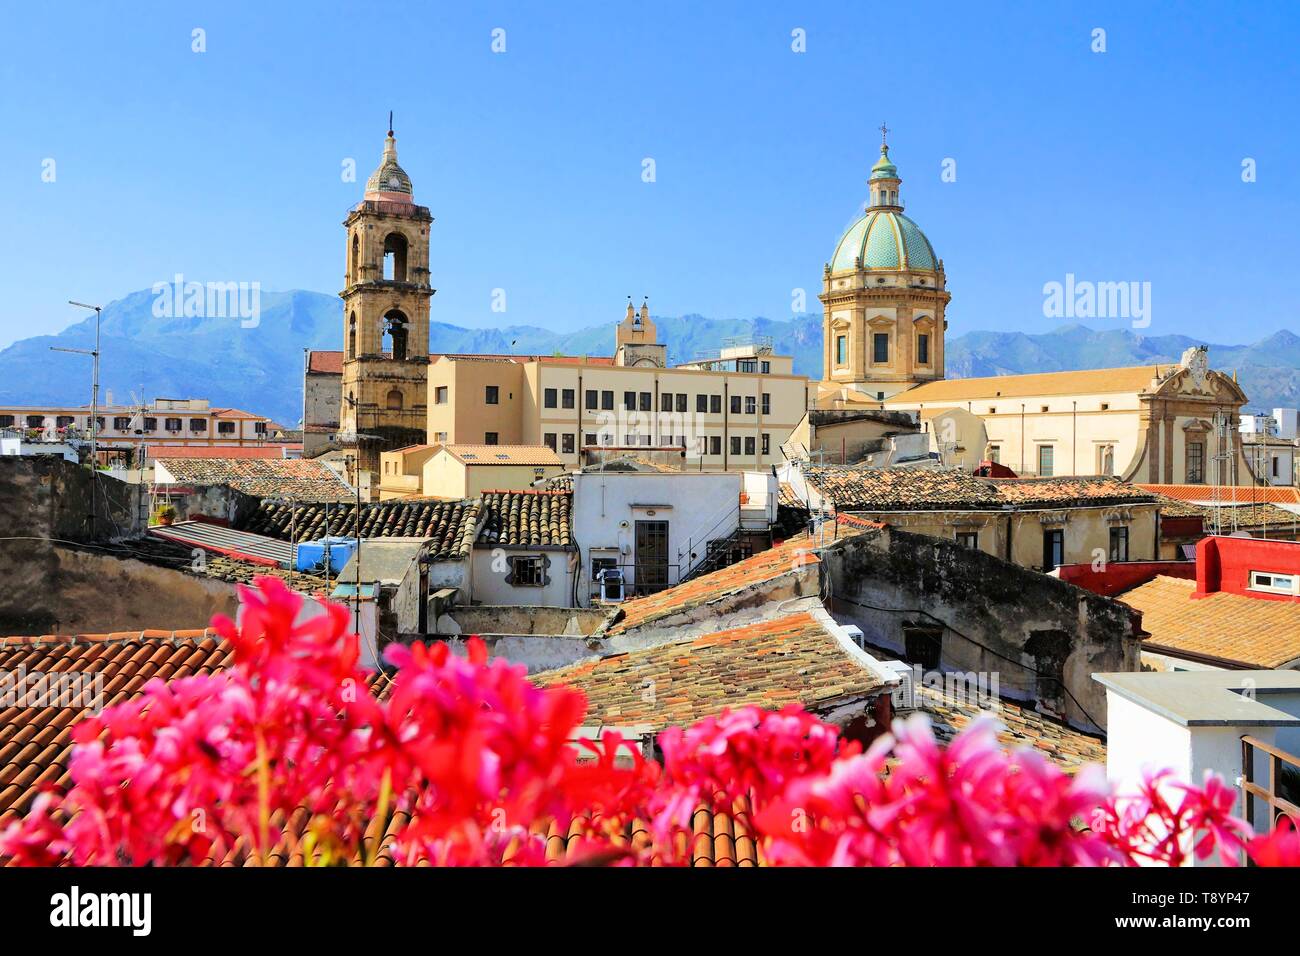 View over the rooftops and churches of Palermo, Sicily with vibrant flowers Stock Photo